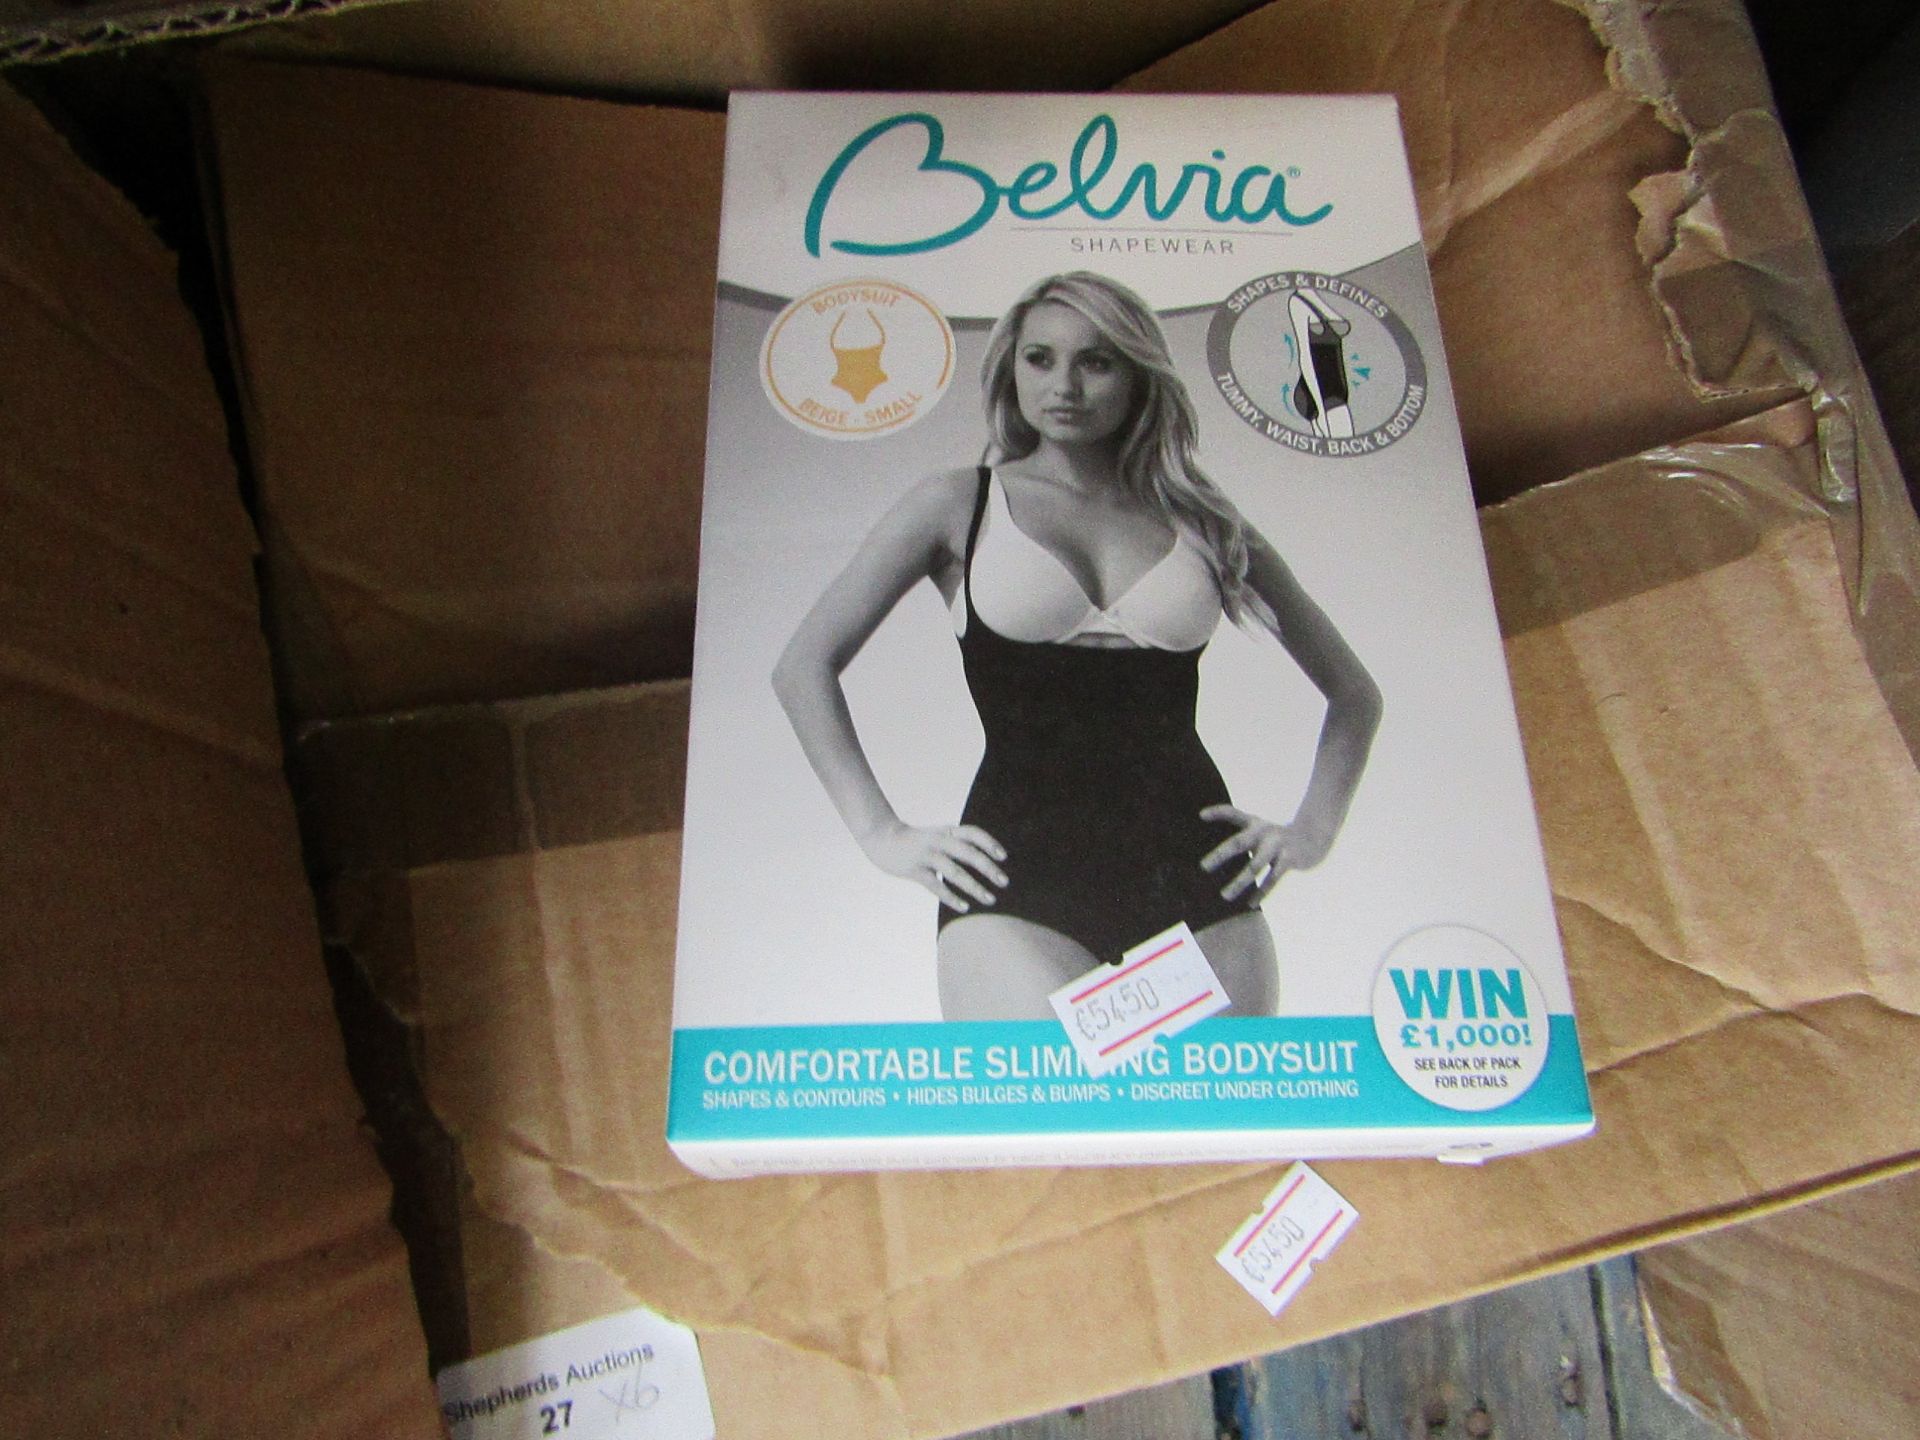 6x Belvia comfortable slimming bodysuit, new and boxed.